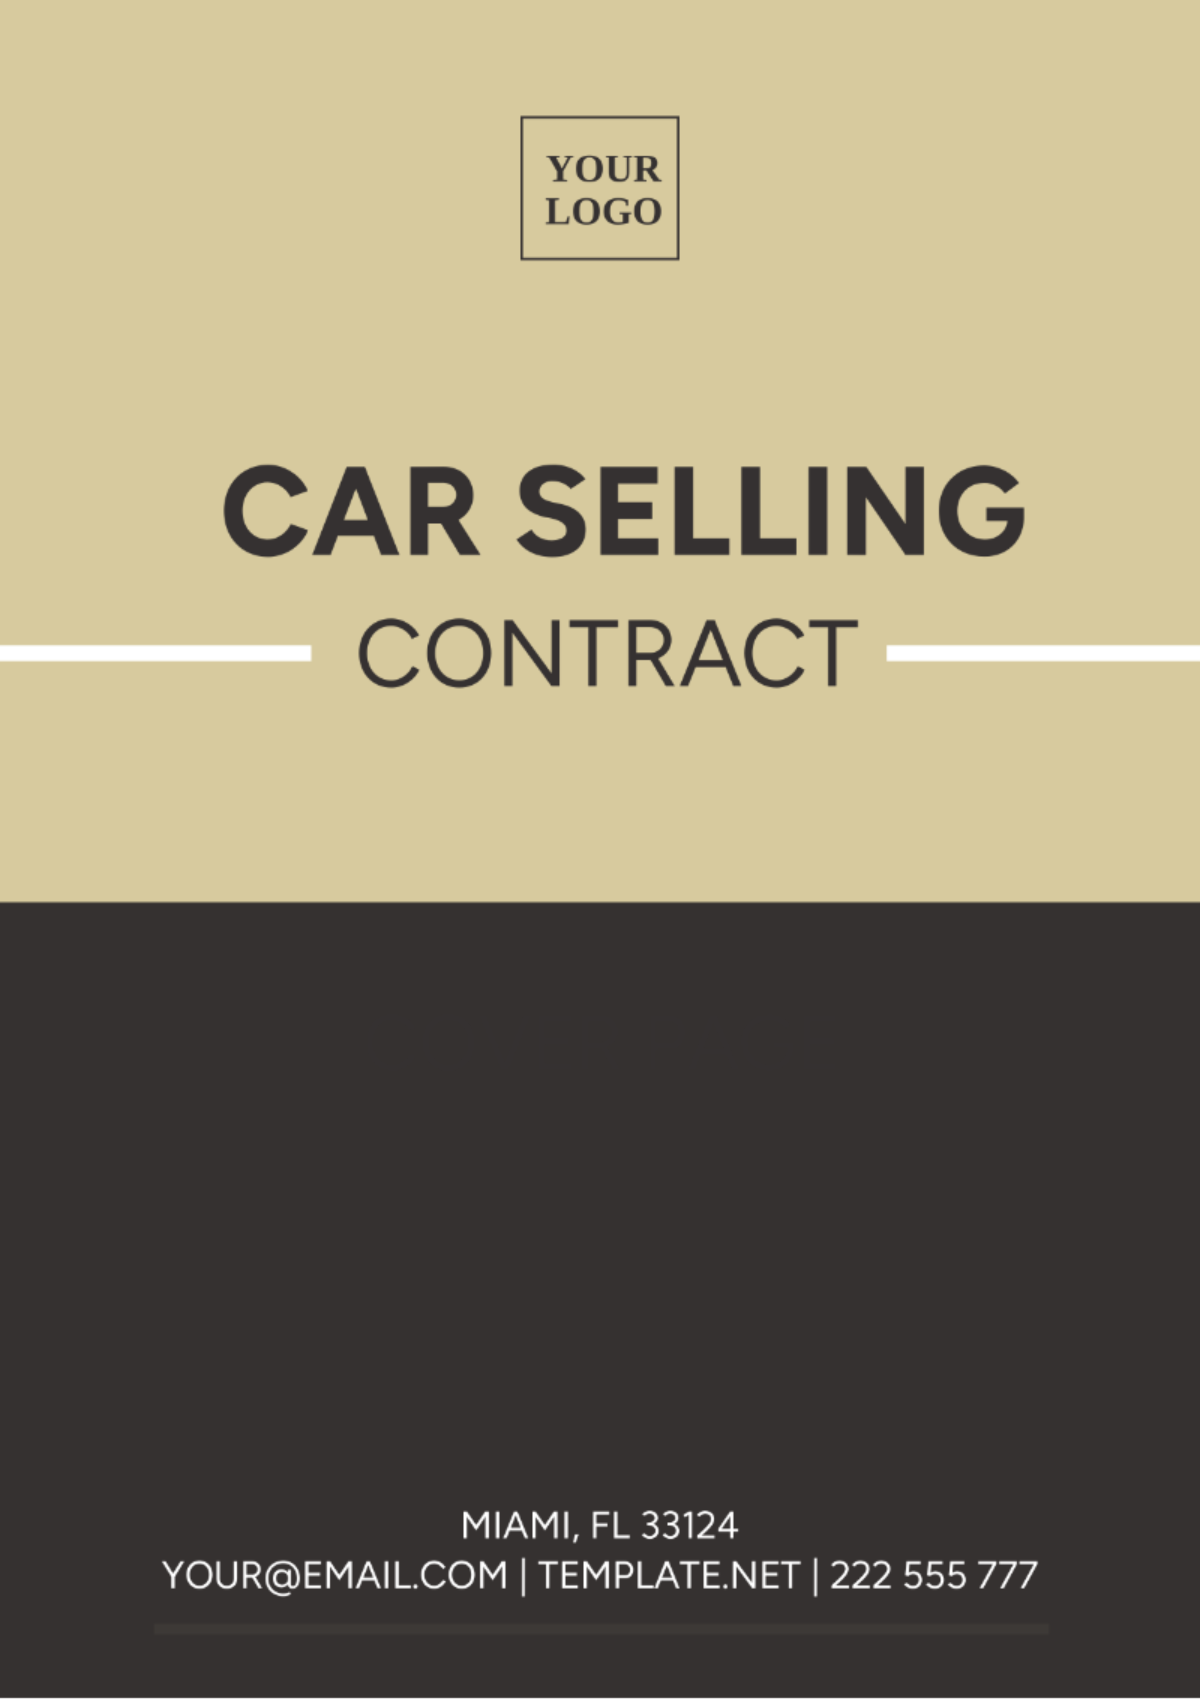 Car Selling Contract Template